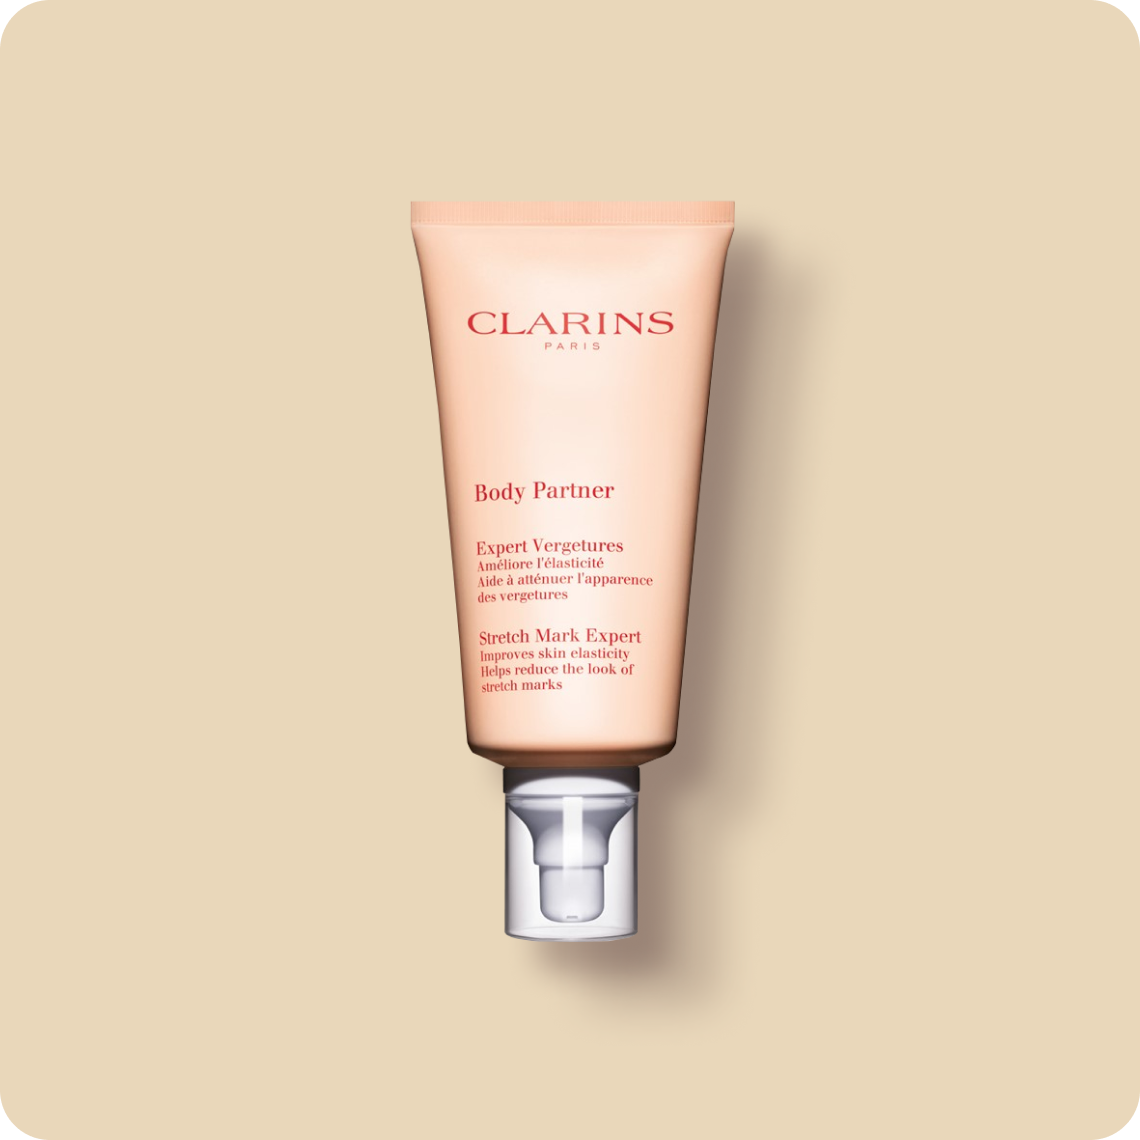 Clarins Firming & Slimming Treatments